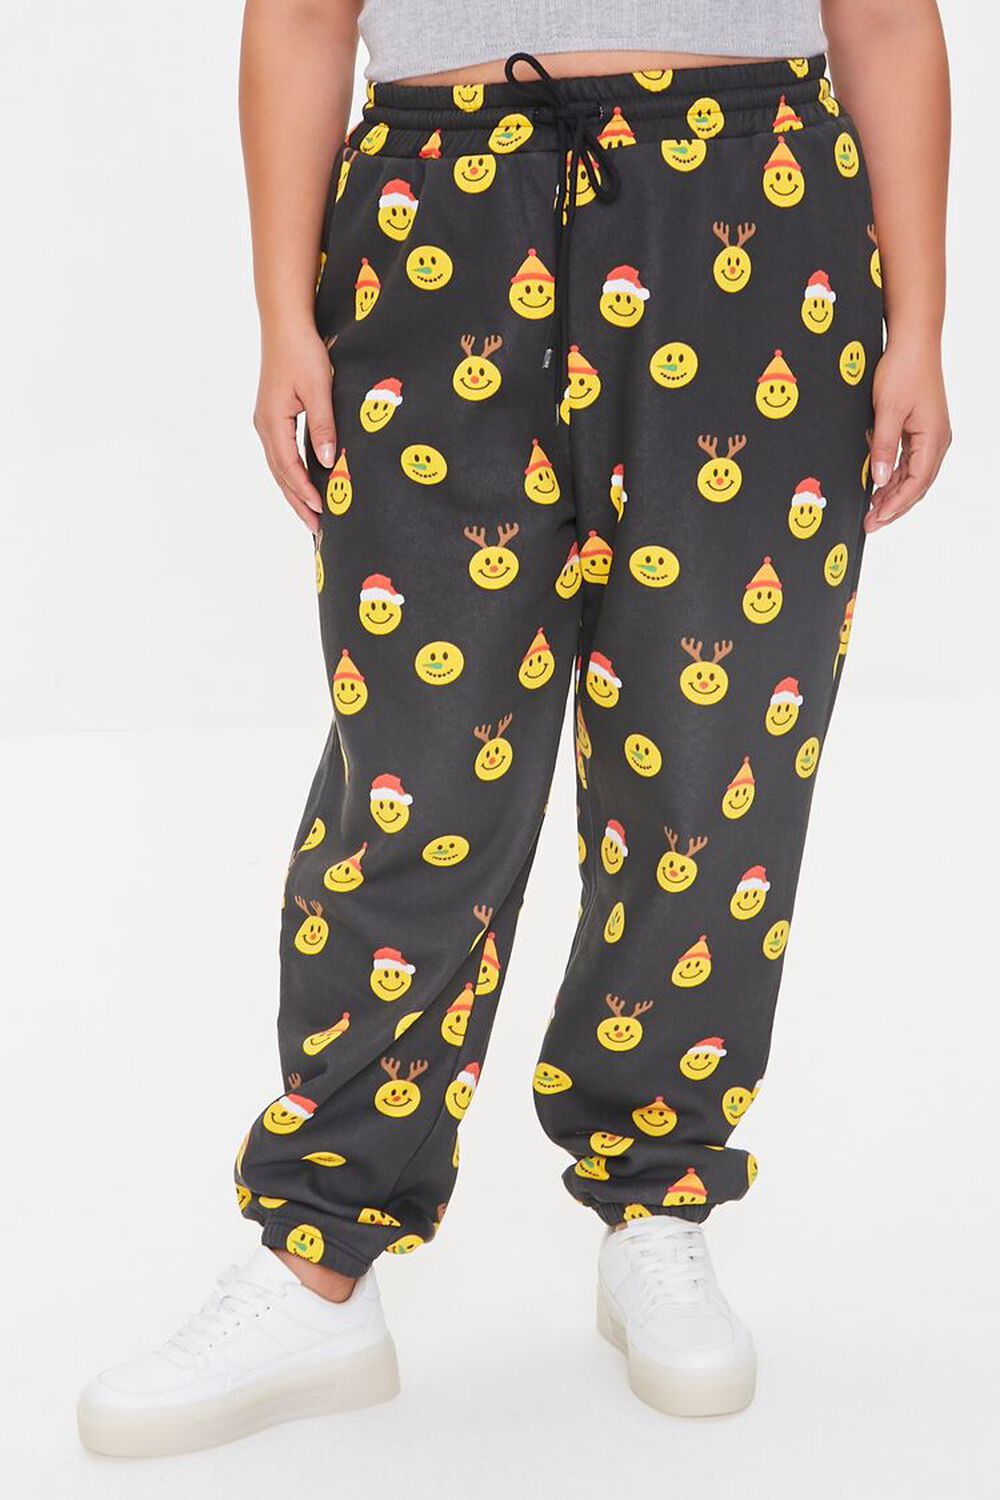 BLACK/YELLOW Plus Size Holiday Happy Face Joggers, image 2